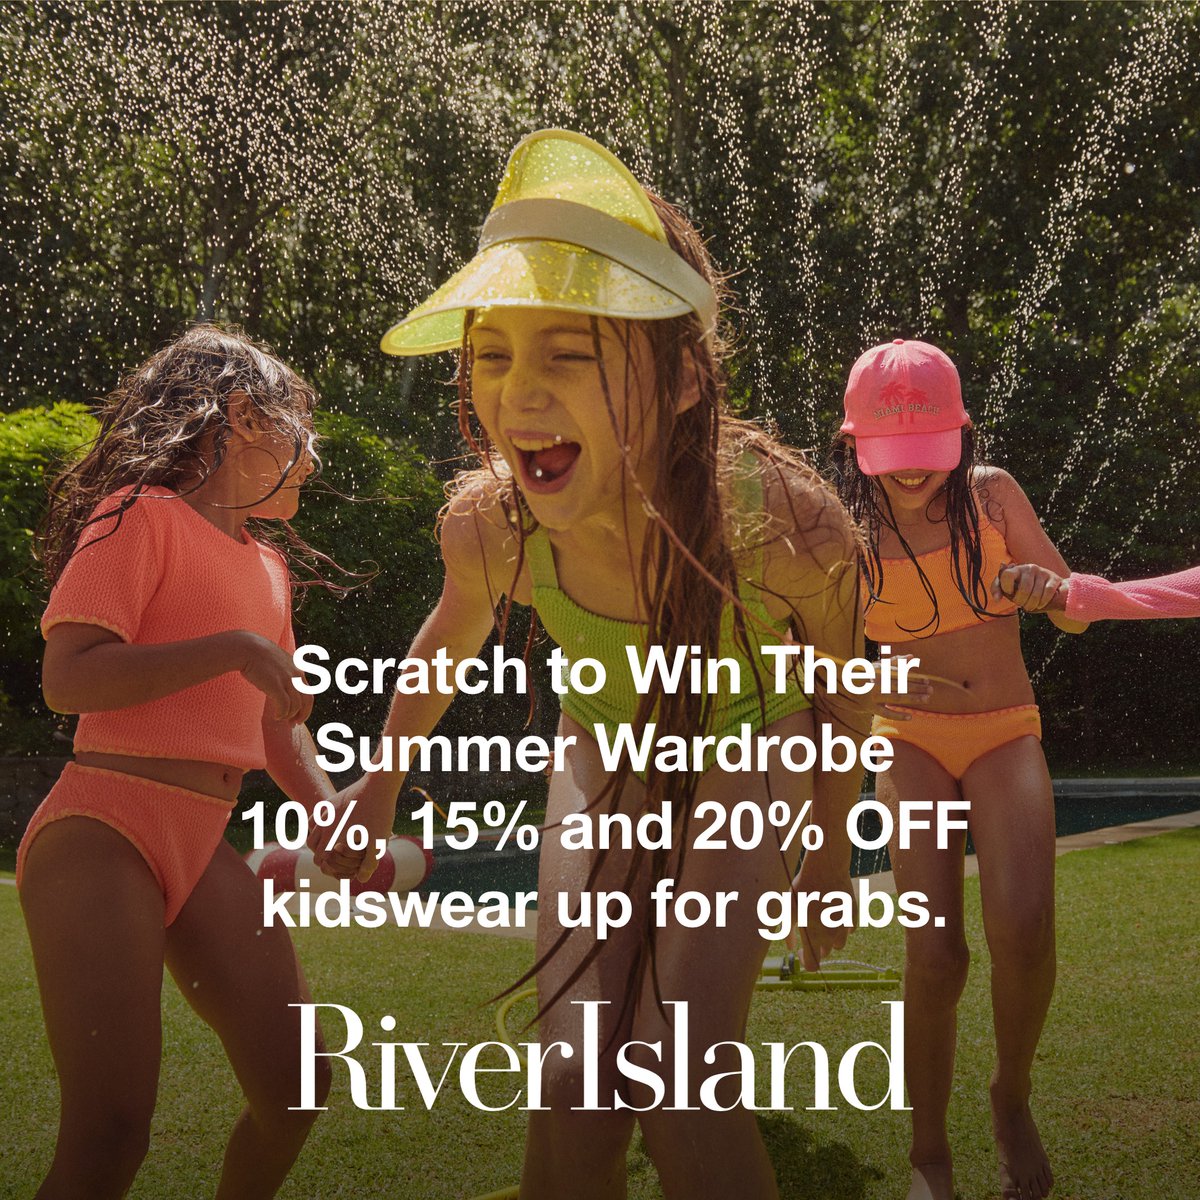 Win your little one’s summer wardrobe with @riverisland 🎉 Pop in store between Fri 17 - Sun 26 May to be in with a chance of receiving a surprise scratch card to with 10%, 15% and 20% off kidswear up for grabs, not to mention an entire wardrobe for one lucky winner! 😎